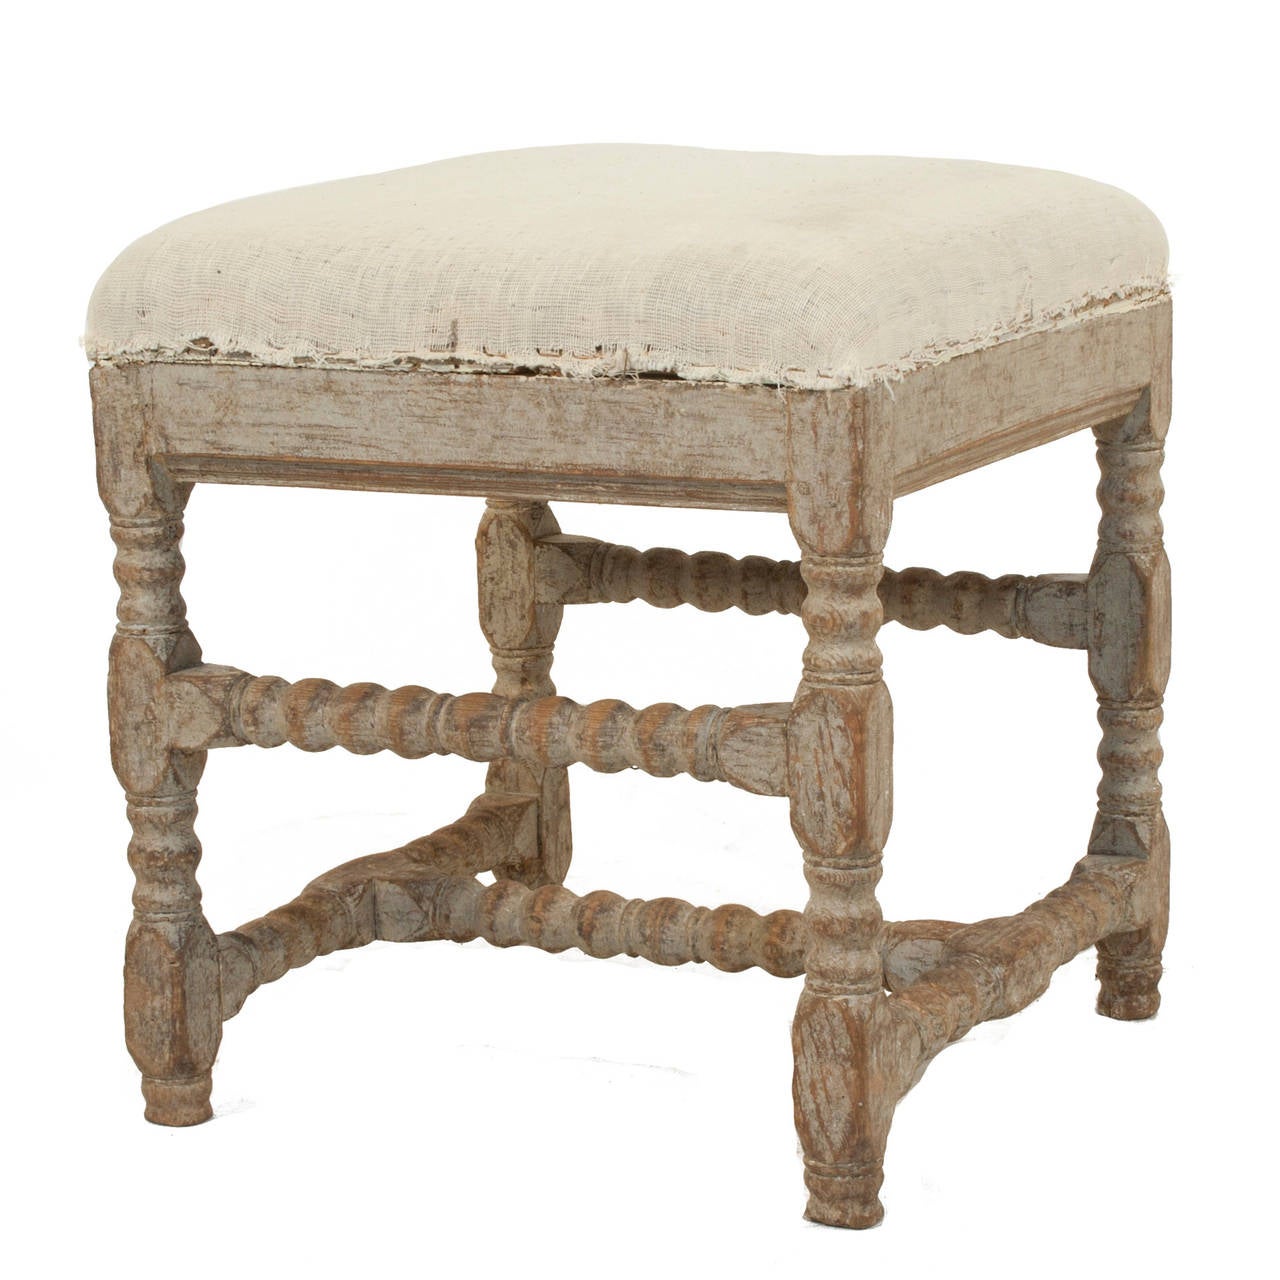 Pair of Baroque stools in a worn grey patina.